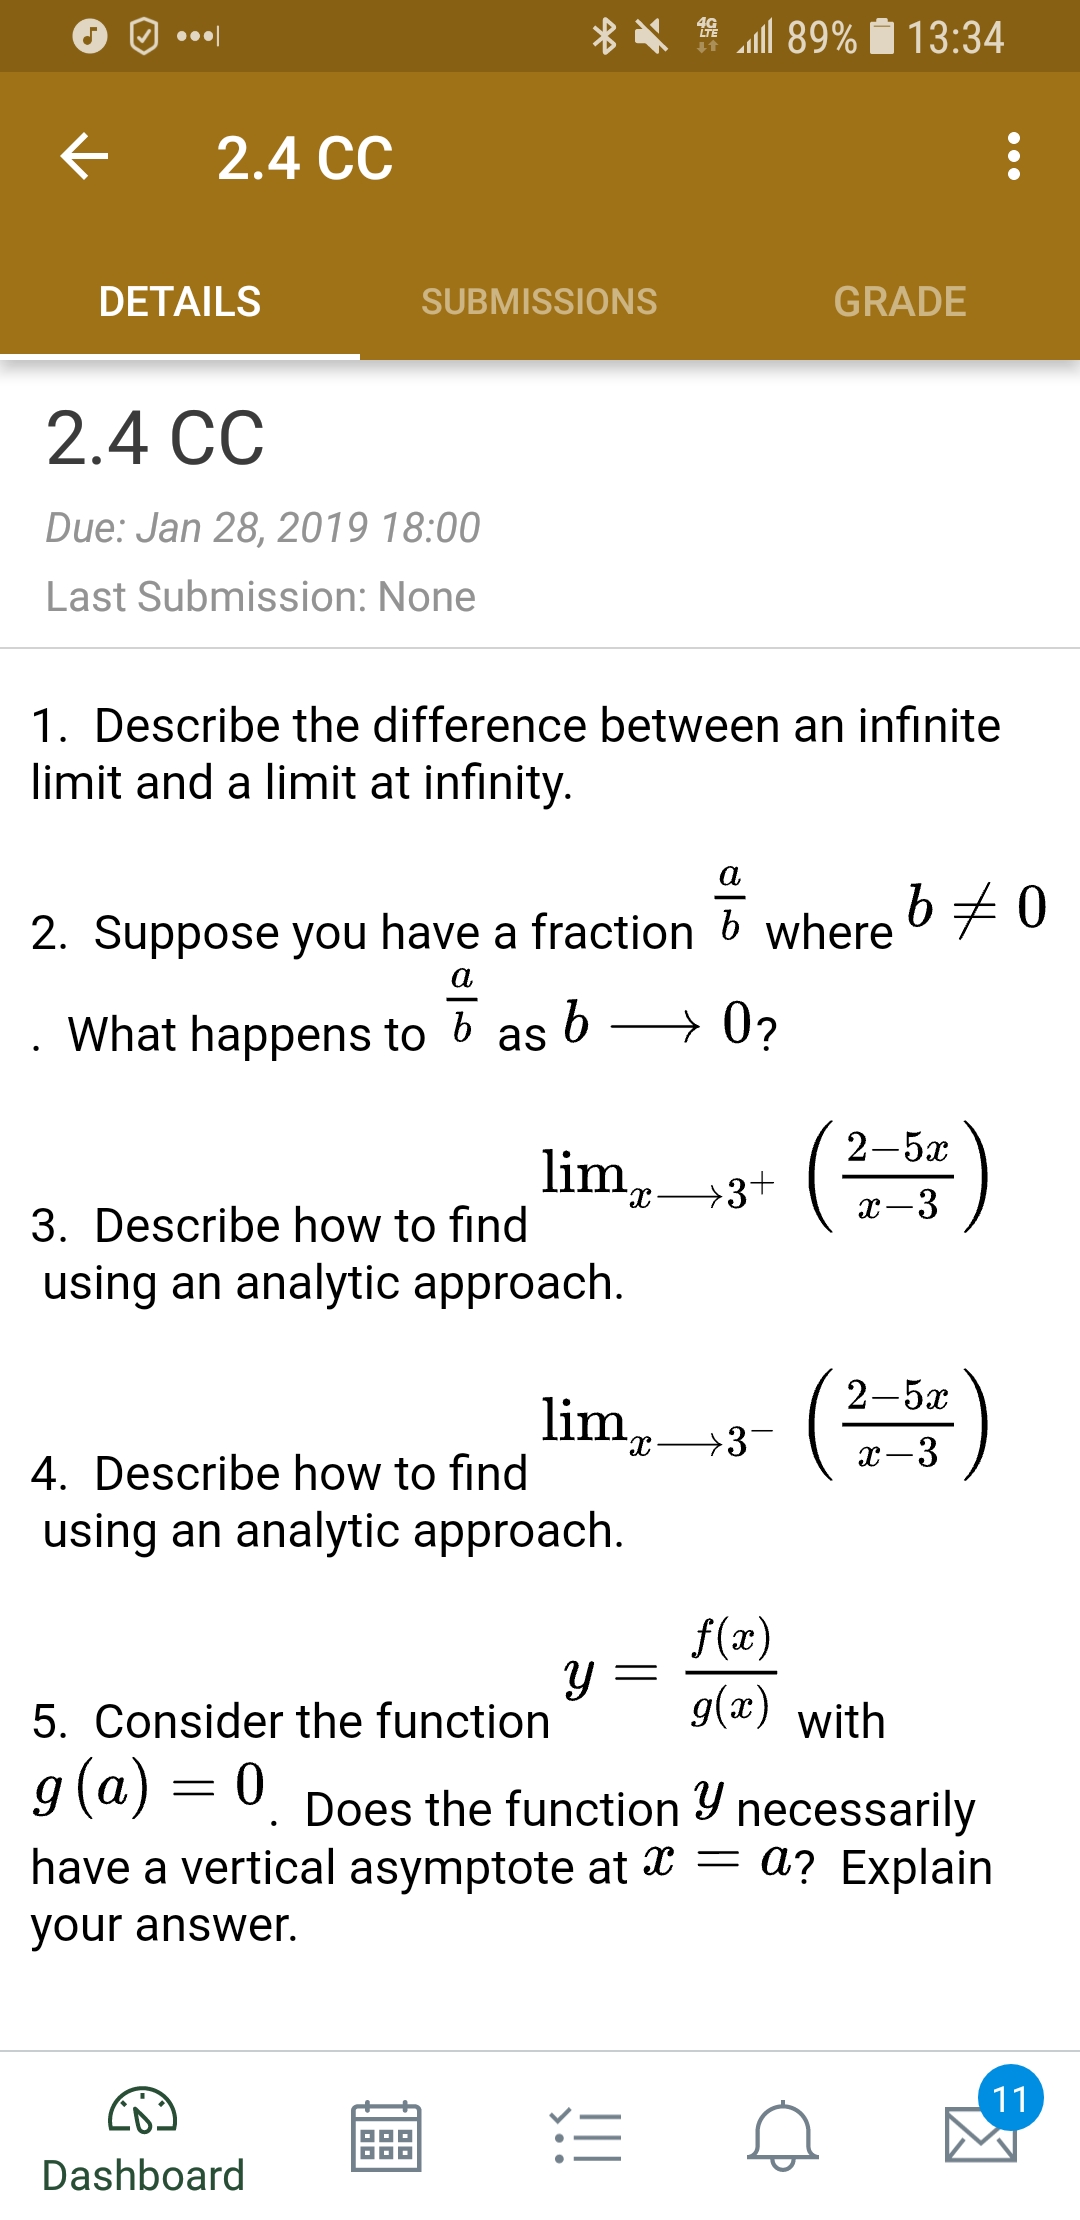 O.
X . "all 89% 13:34
< 2.4 CC
DETAILS
SUBMISSIONS
GRADE
2.4 CC
Due: Jan 28, 2019 18:00
Last Submission: None
1. Describe the difference between an infinite
limit and a limit at infinity
2. Suppose you have a fraction b where
What happens to b as
2-5x
3. Describe how to find
using an analytic approach
2-5x
lim, ->3
dc
4. Describe how to find
using an analytic approach
f(x)
y g(x) with
5. Consider the function
9(aj-0. Does the function y necessarily
have a vertical asymptote at x - a? Explain
our answer.
Dashboard
